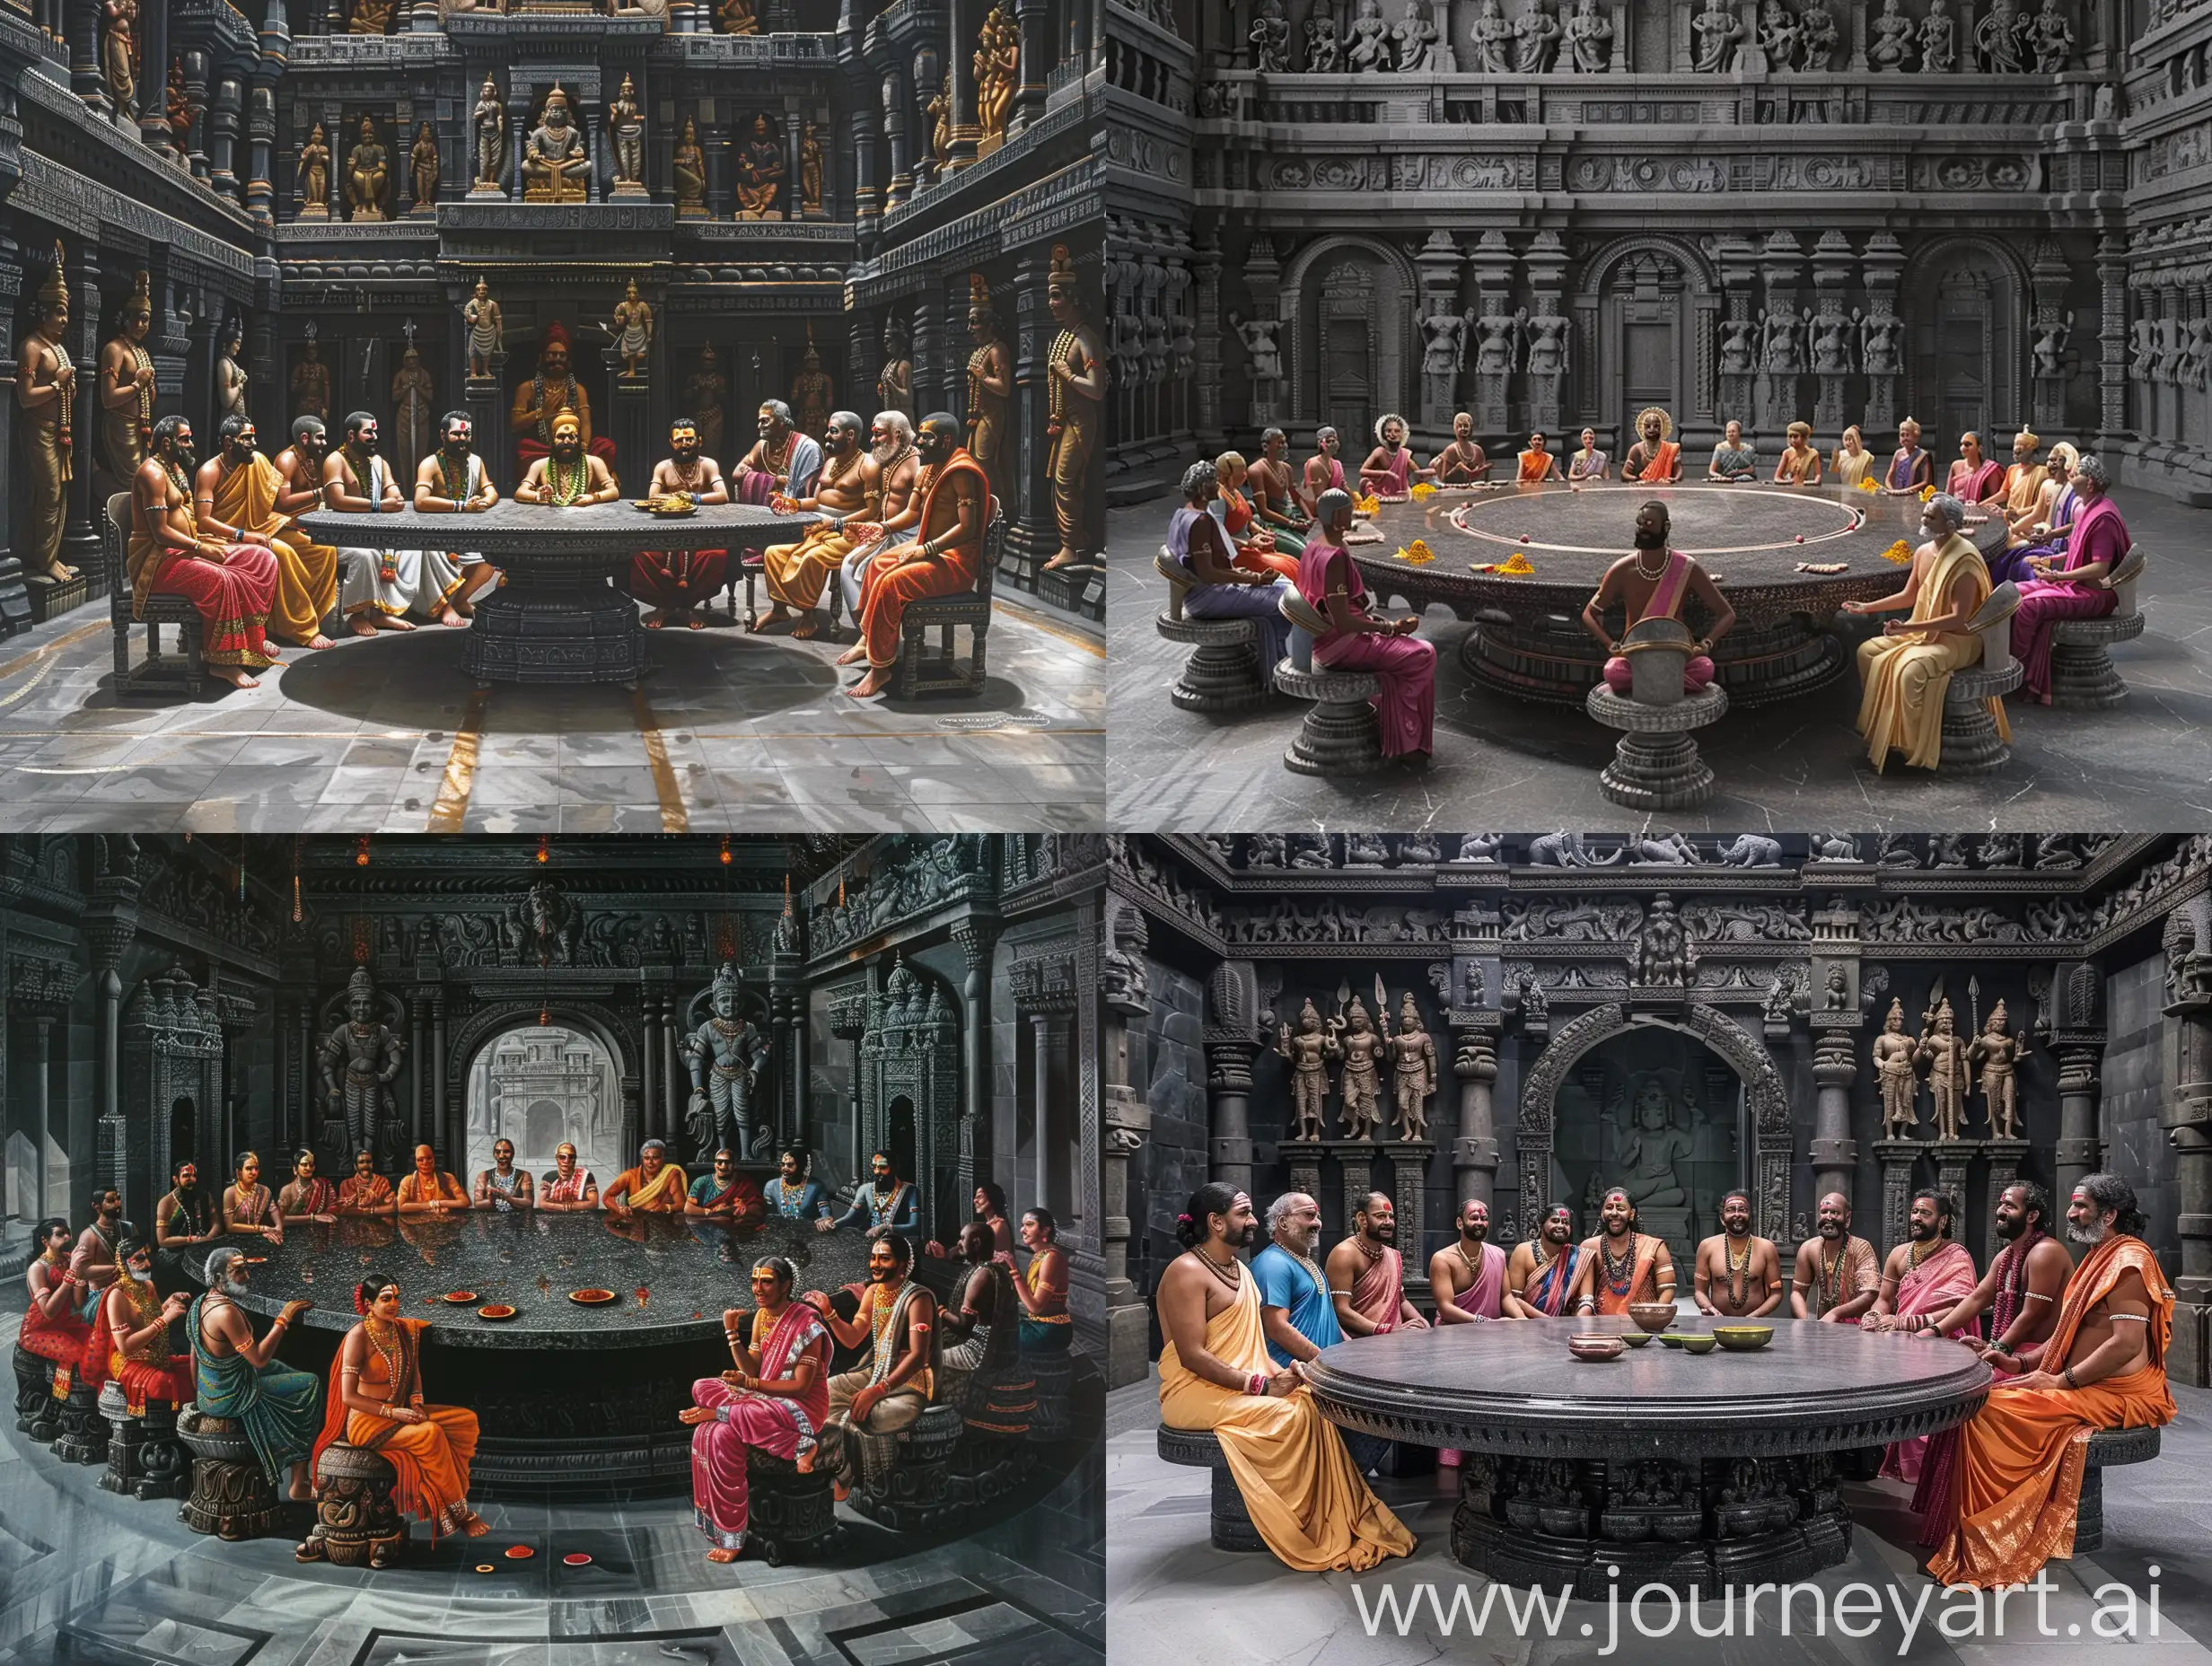 hindus from 4 varnas, brahmana, kshatriya, vaishya and shudra sitting on a round table on all sides smiling proudly, in a hall of a black granite stone building having hindu sculptures on the walls